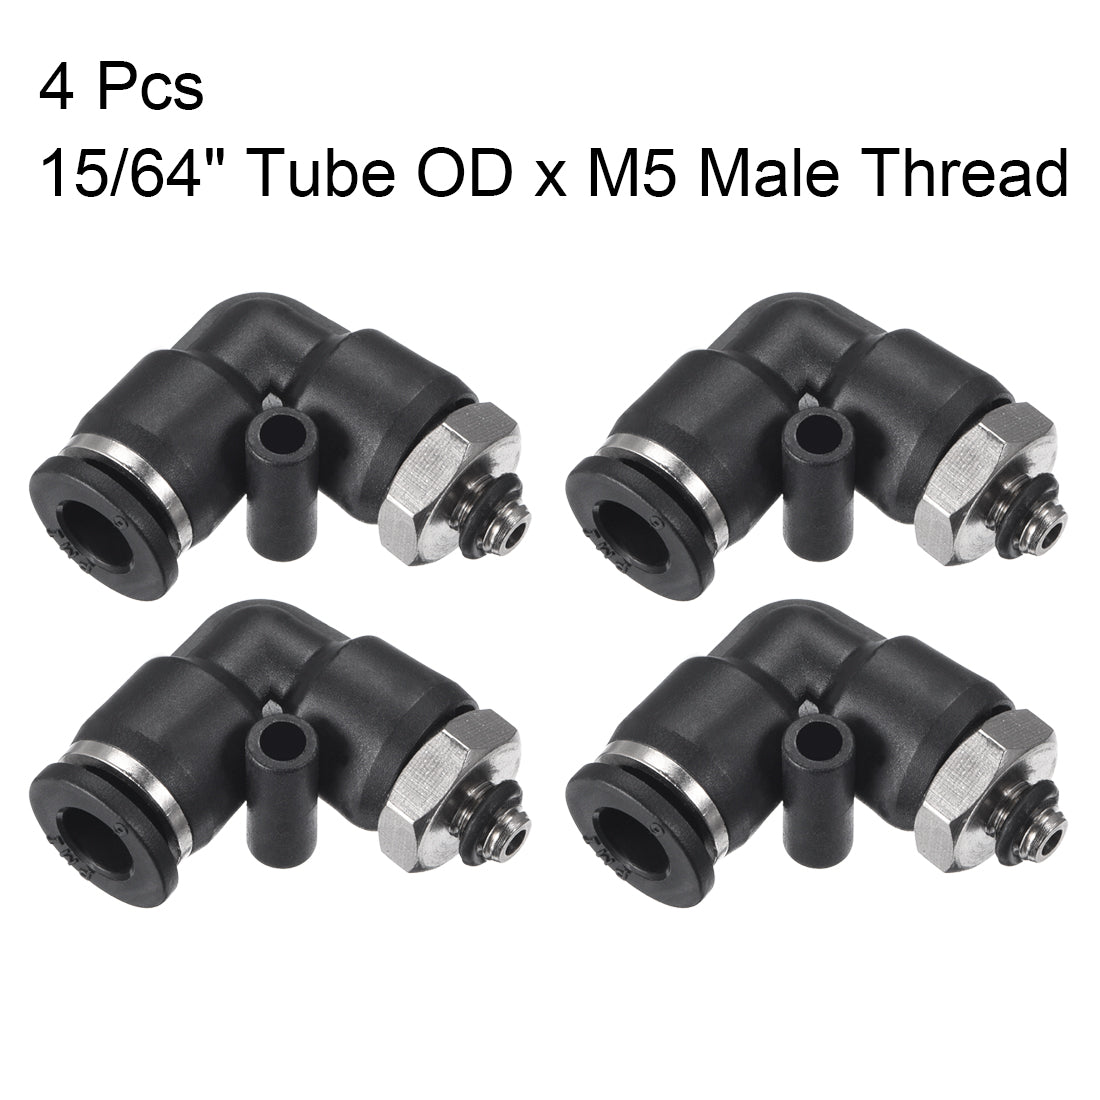 uxcell Uxcell PL6-M5 Pneumatic Push to Connect Fitting, Male Elbow - 15/64" Tube OD x M5 Thread  Tube Fitting 4pcs